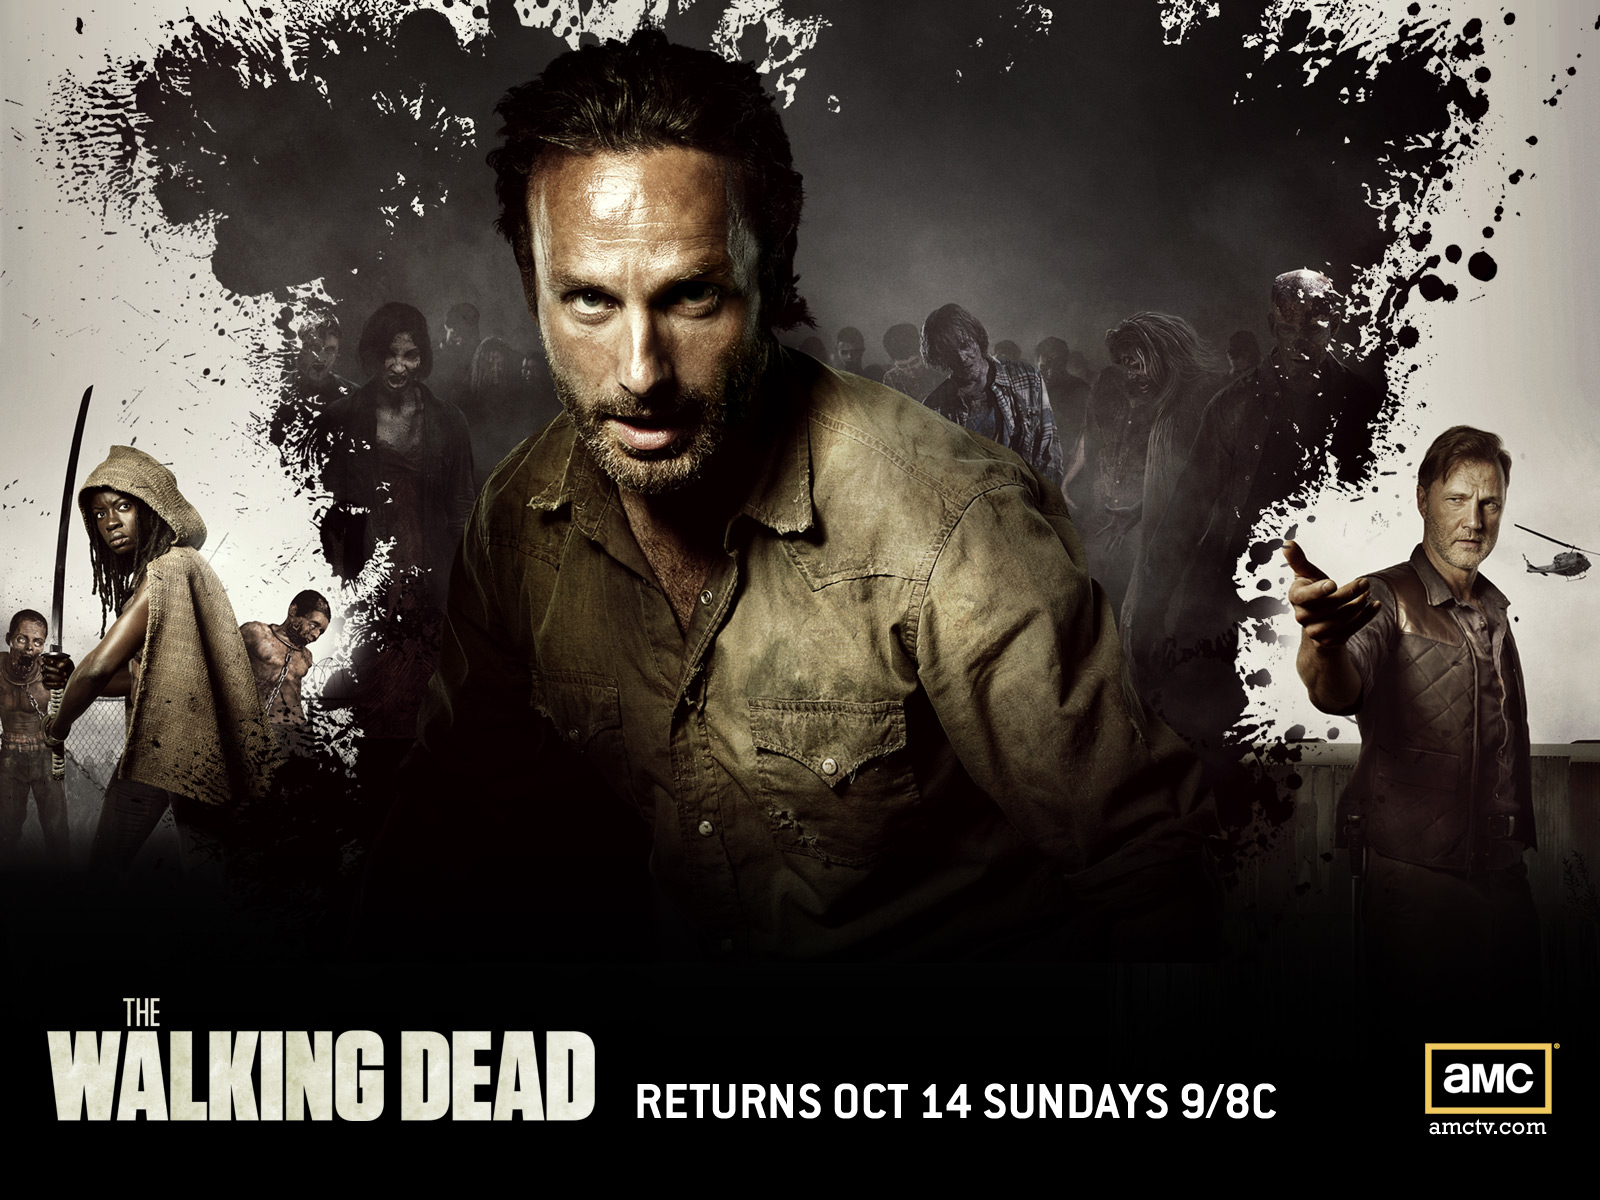 Download full size The Walking Dead wallpaper / Movies / 1600x1200